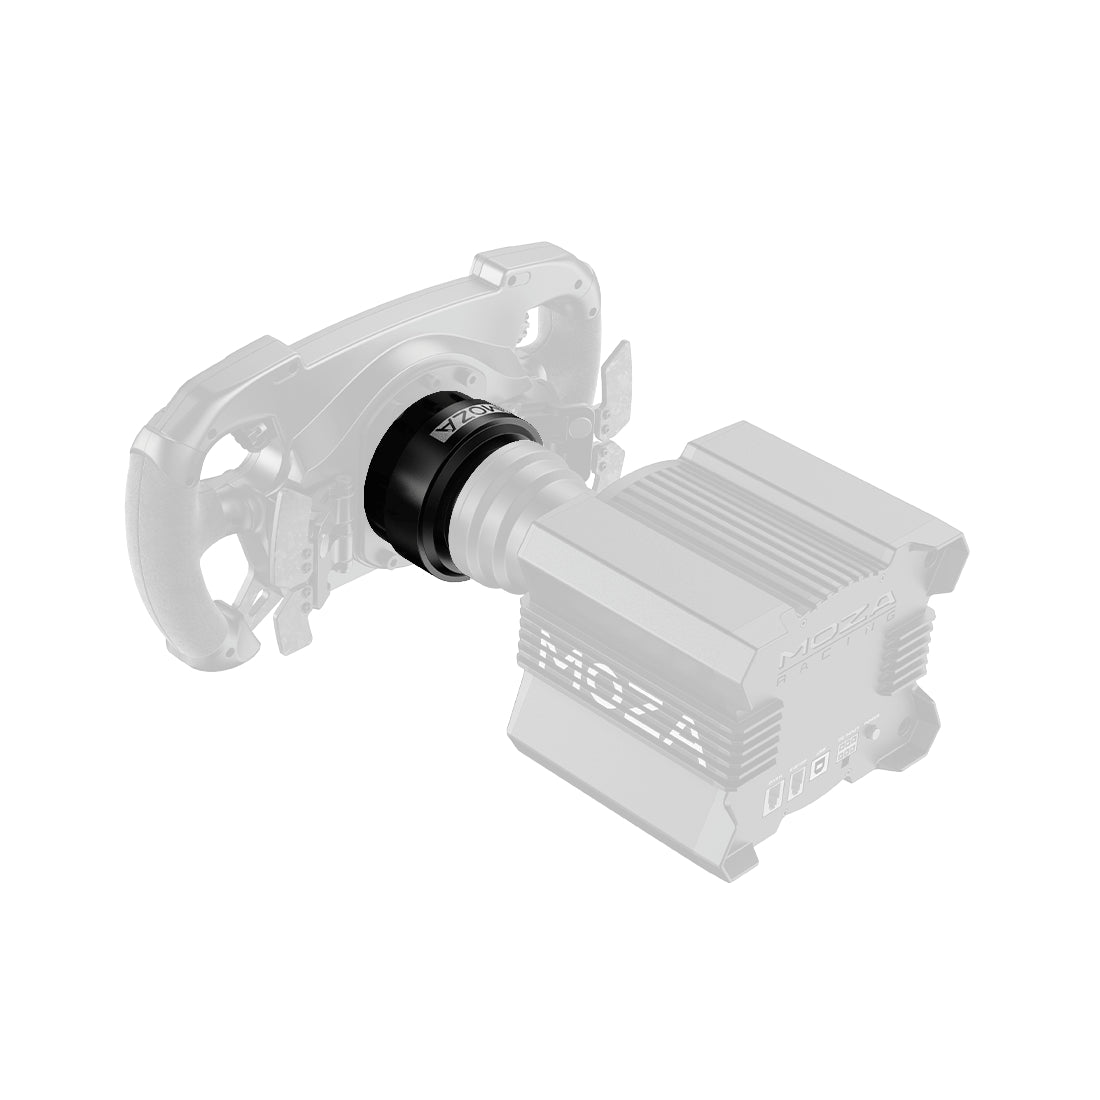 Moza Quick Release Adapter For R16 and R21 - أكسسوارات محاكاة - Store 974 | ستور ٩٧٤